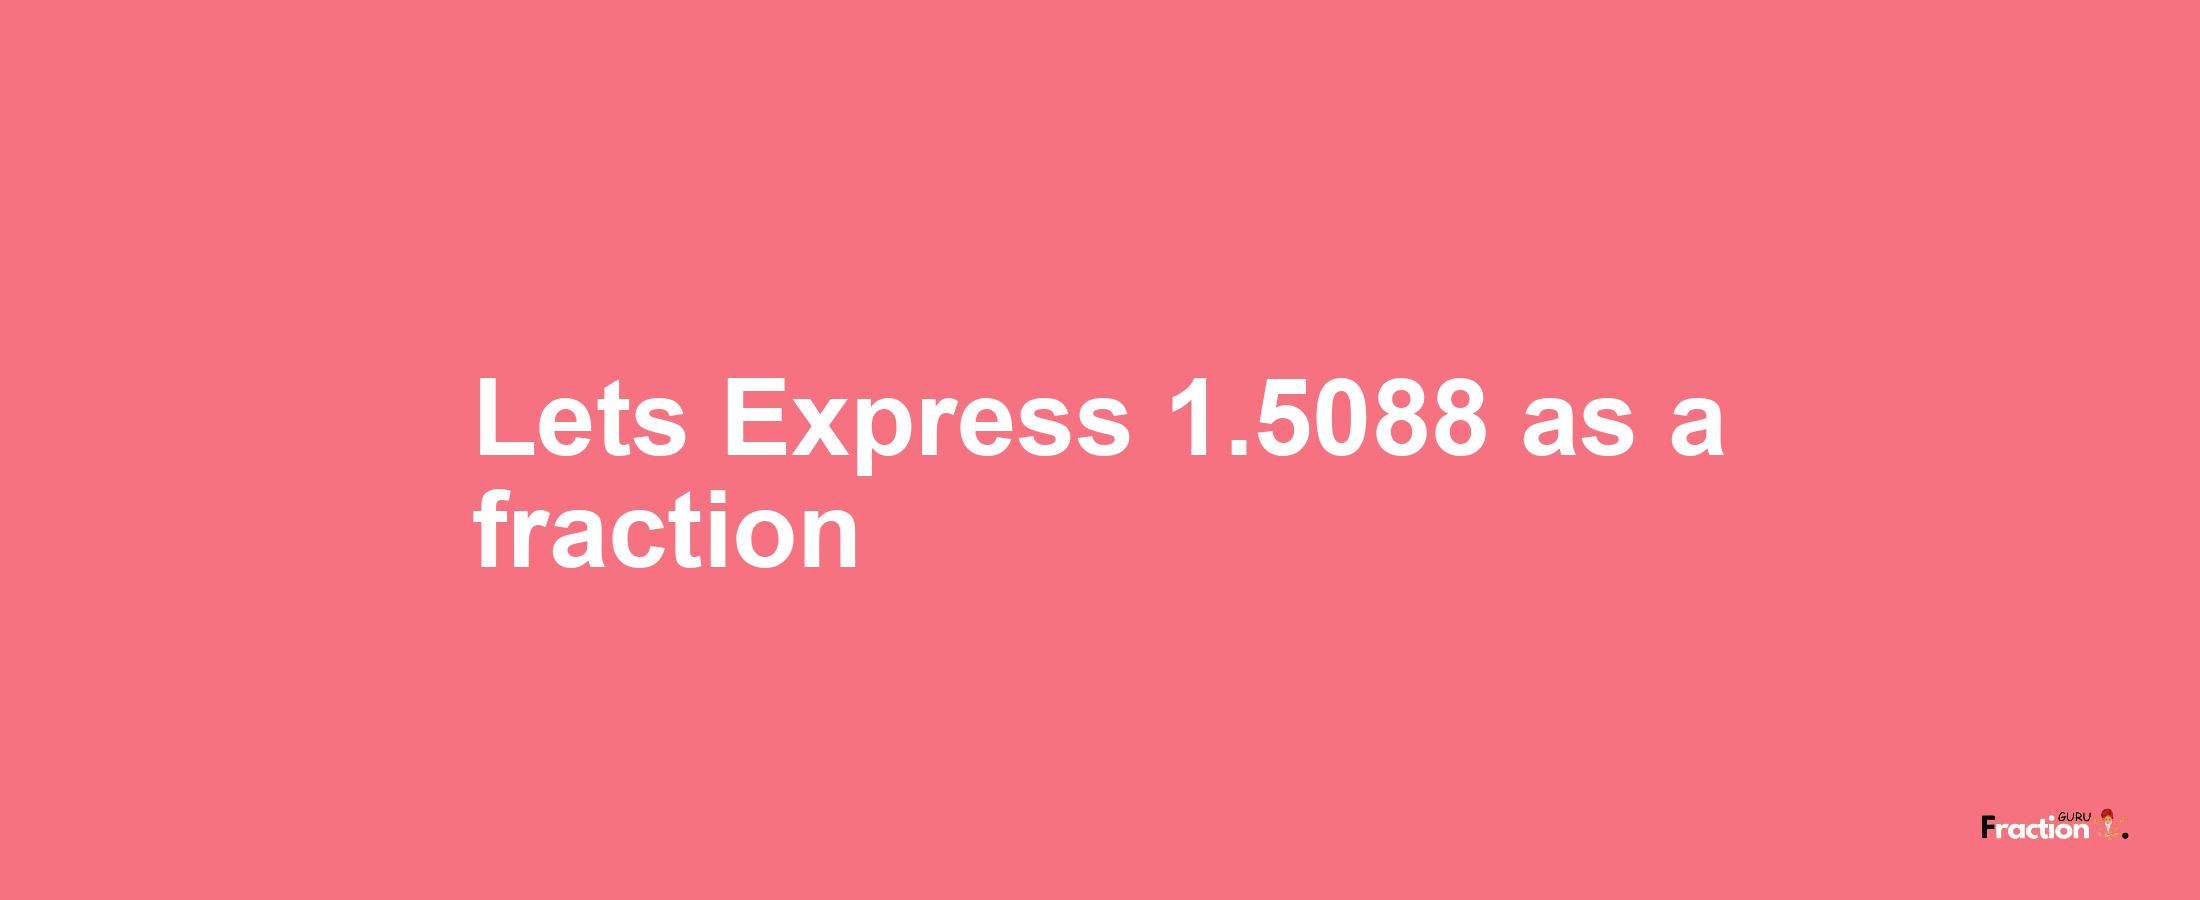 Lets Express 1.5088 as afraction